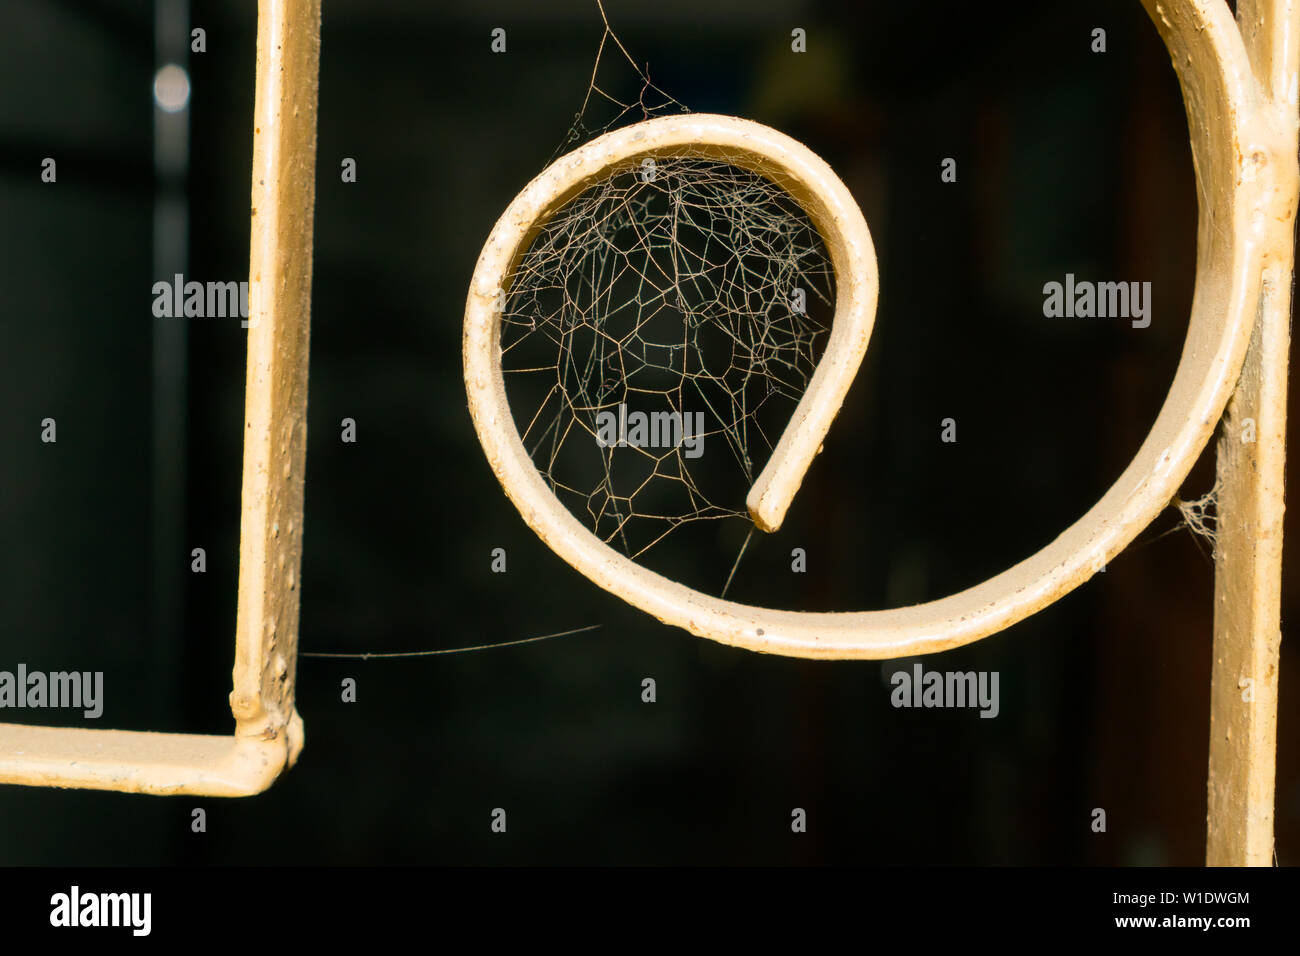 close up of a spider web in a window with a dark blurred background. Stock Photo